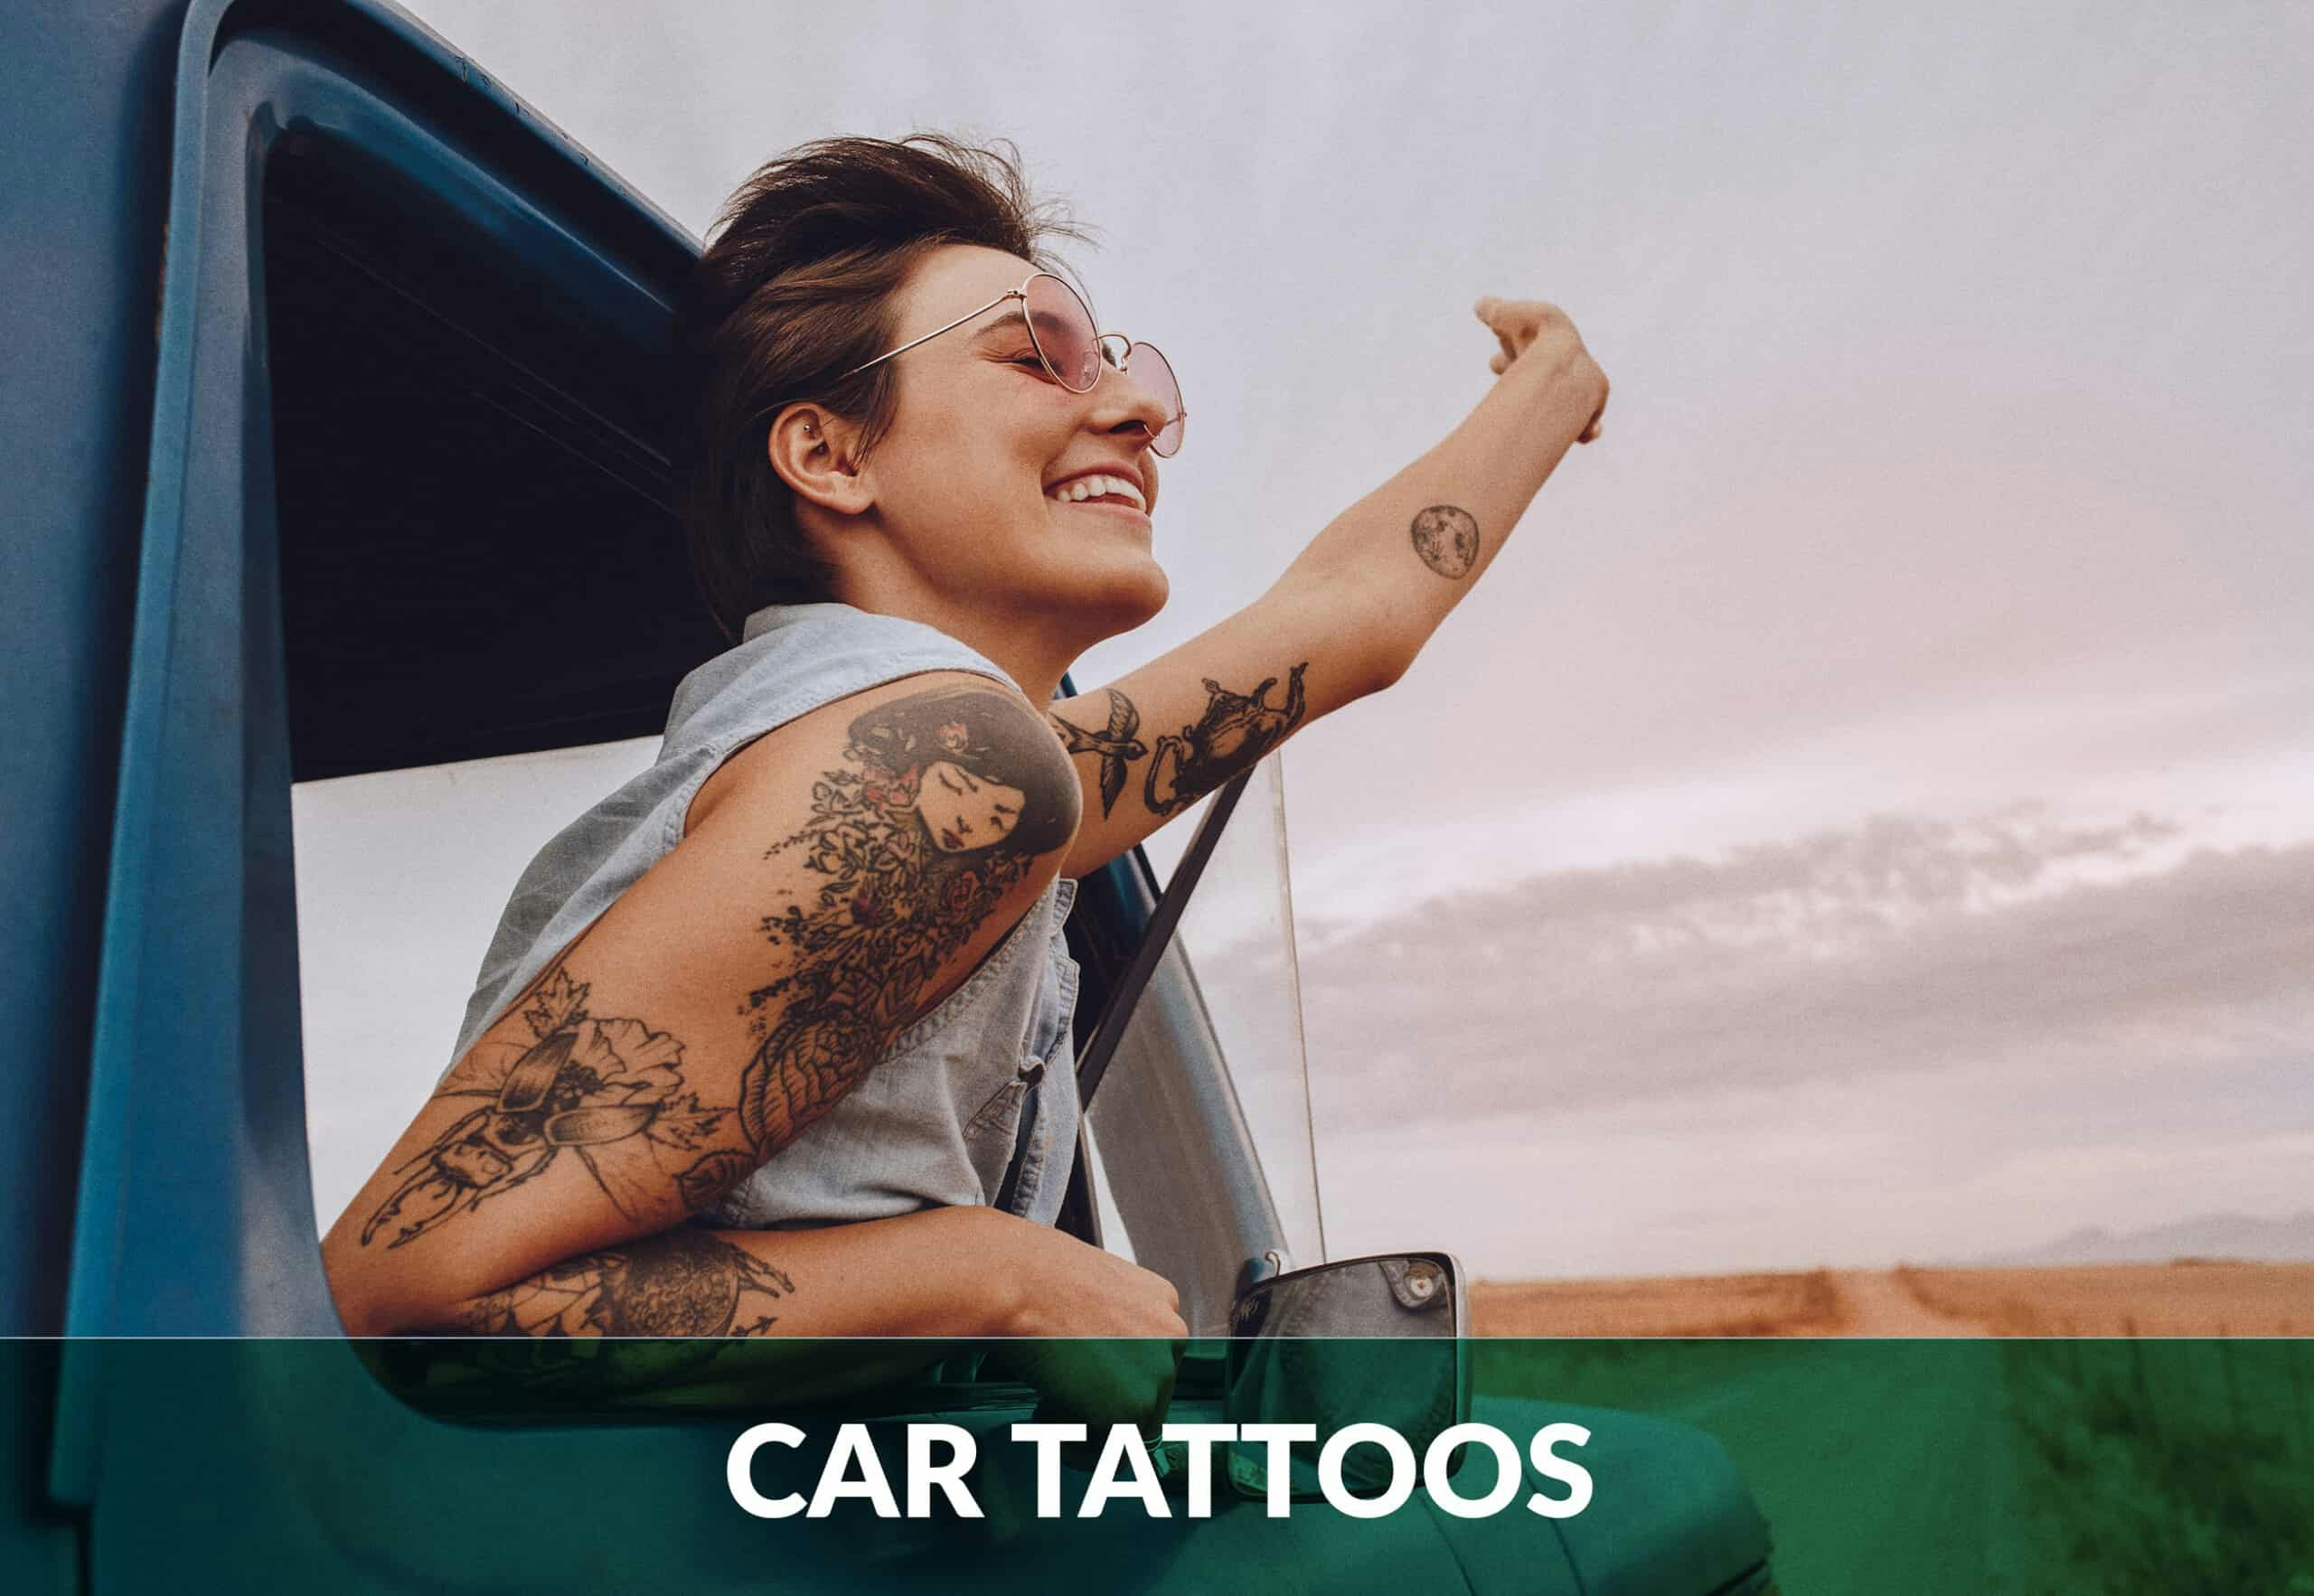 Car Tattoos – The Most Tattooed Car Brands and Models